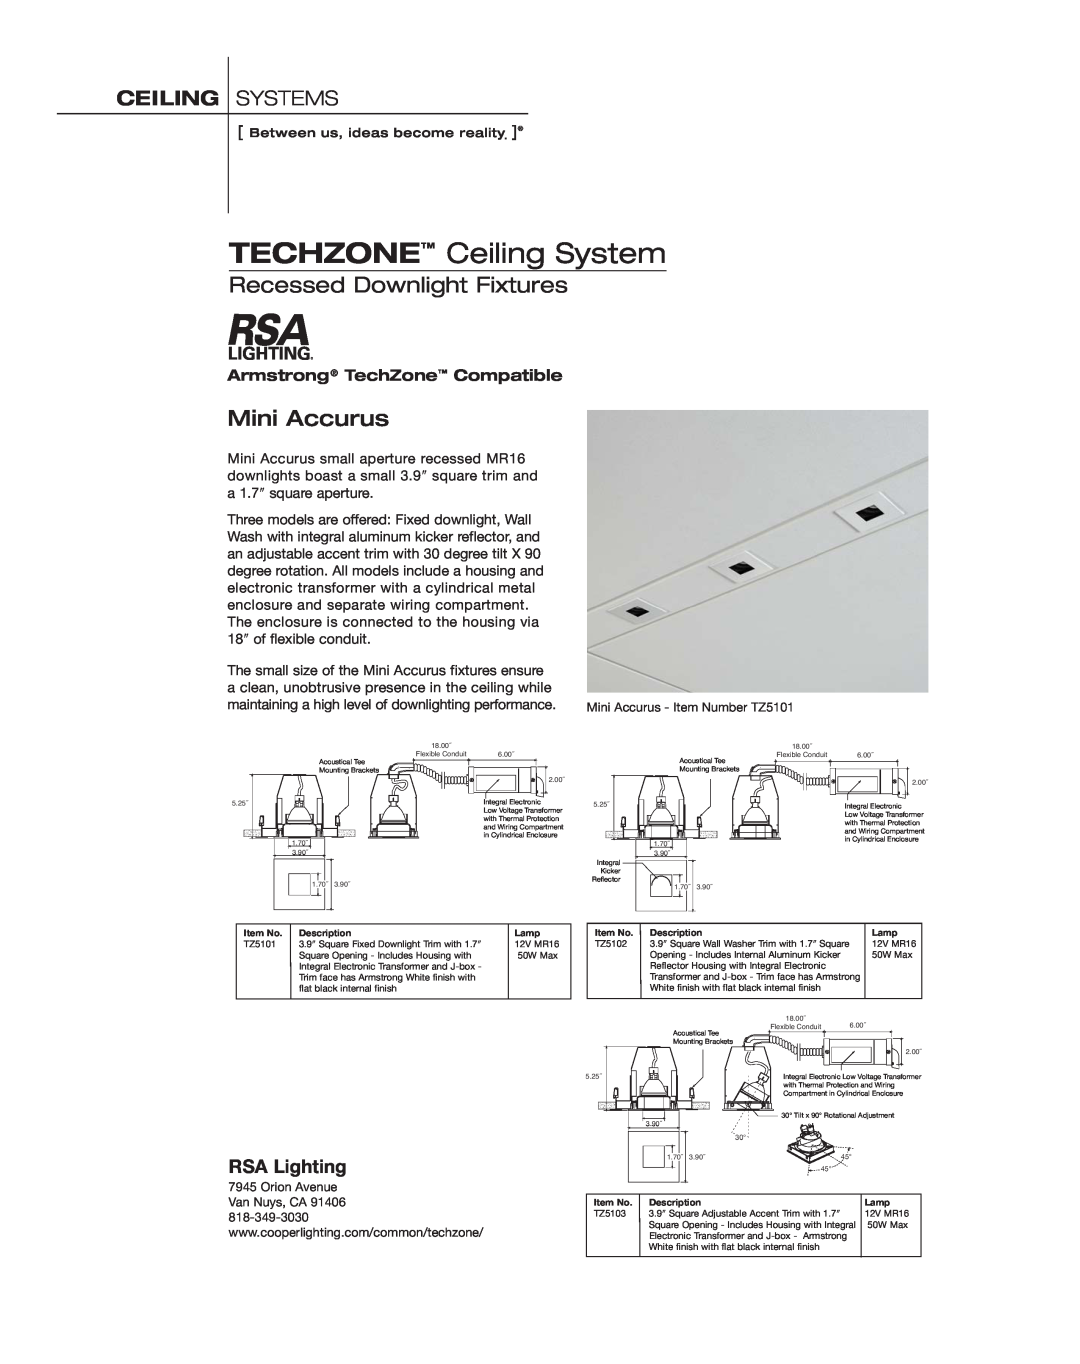 Cooper Lighting Ceiling Systems manual TECHZONE Ceiling System, Recessed Downlight Fixtures, Mini Accurus, RSA Lighting 